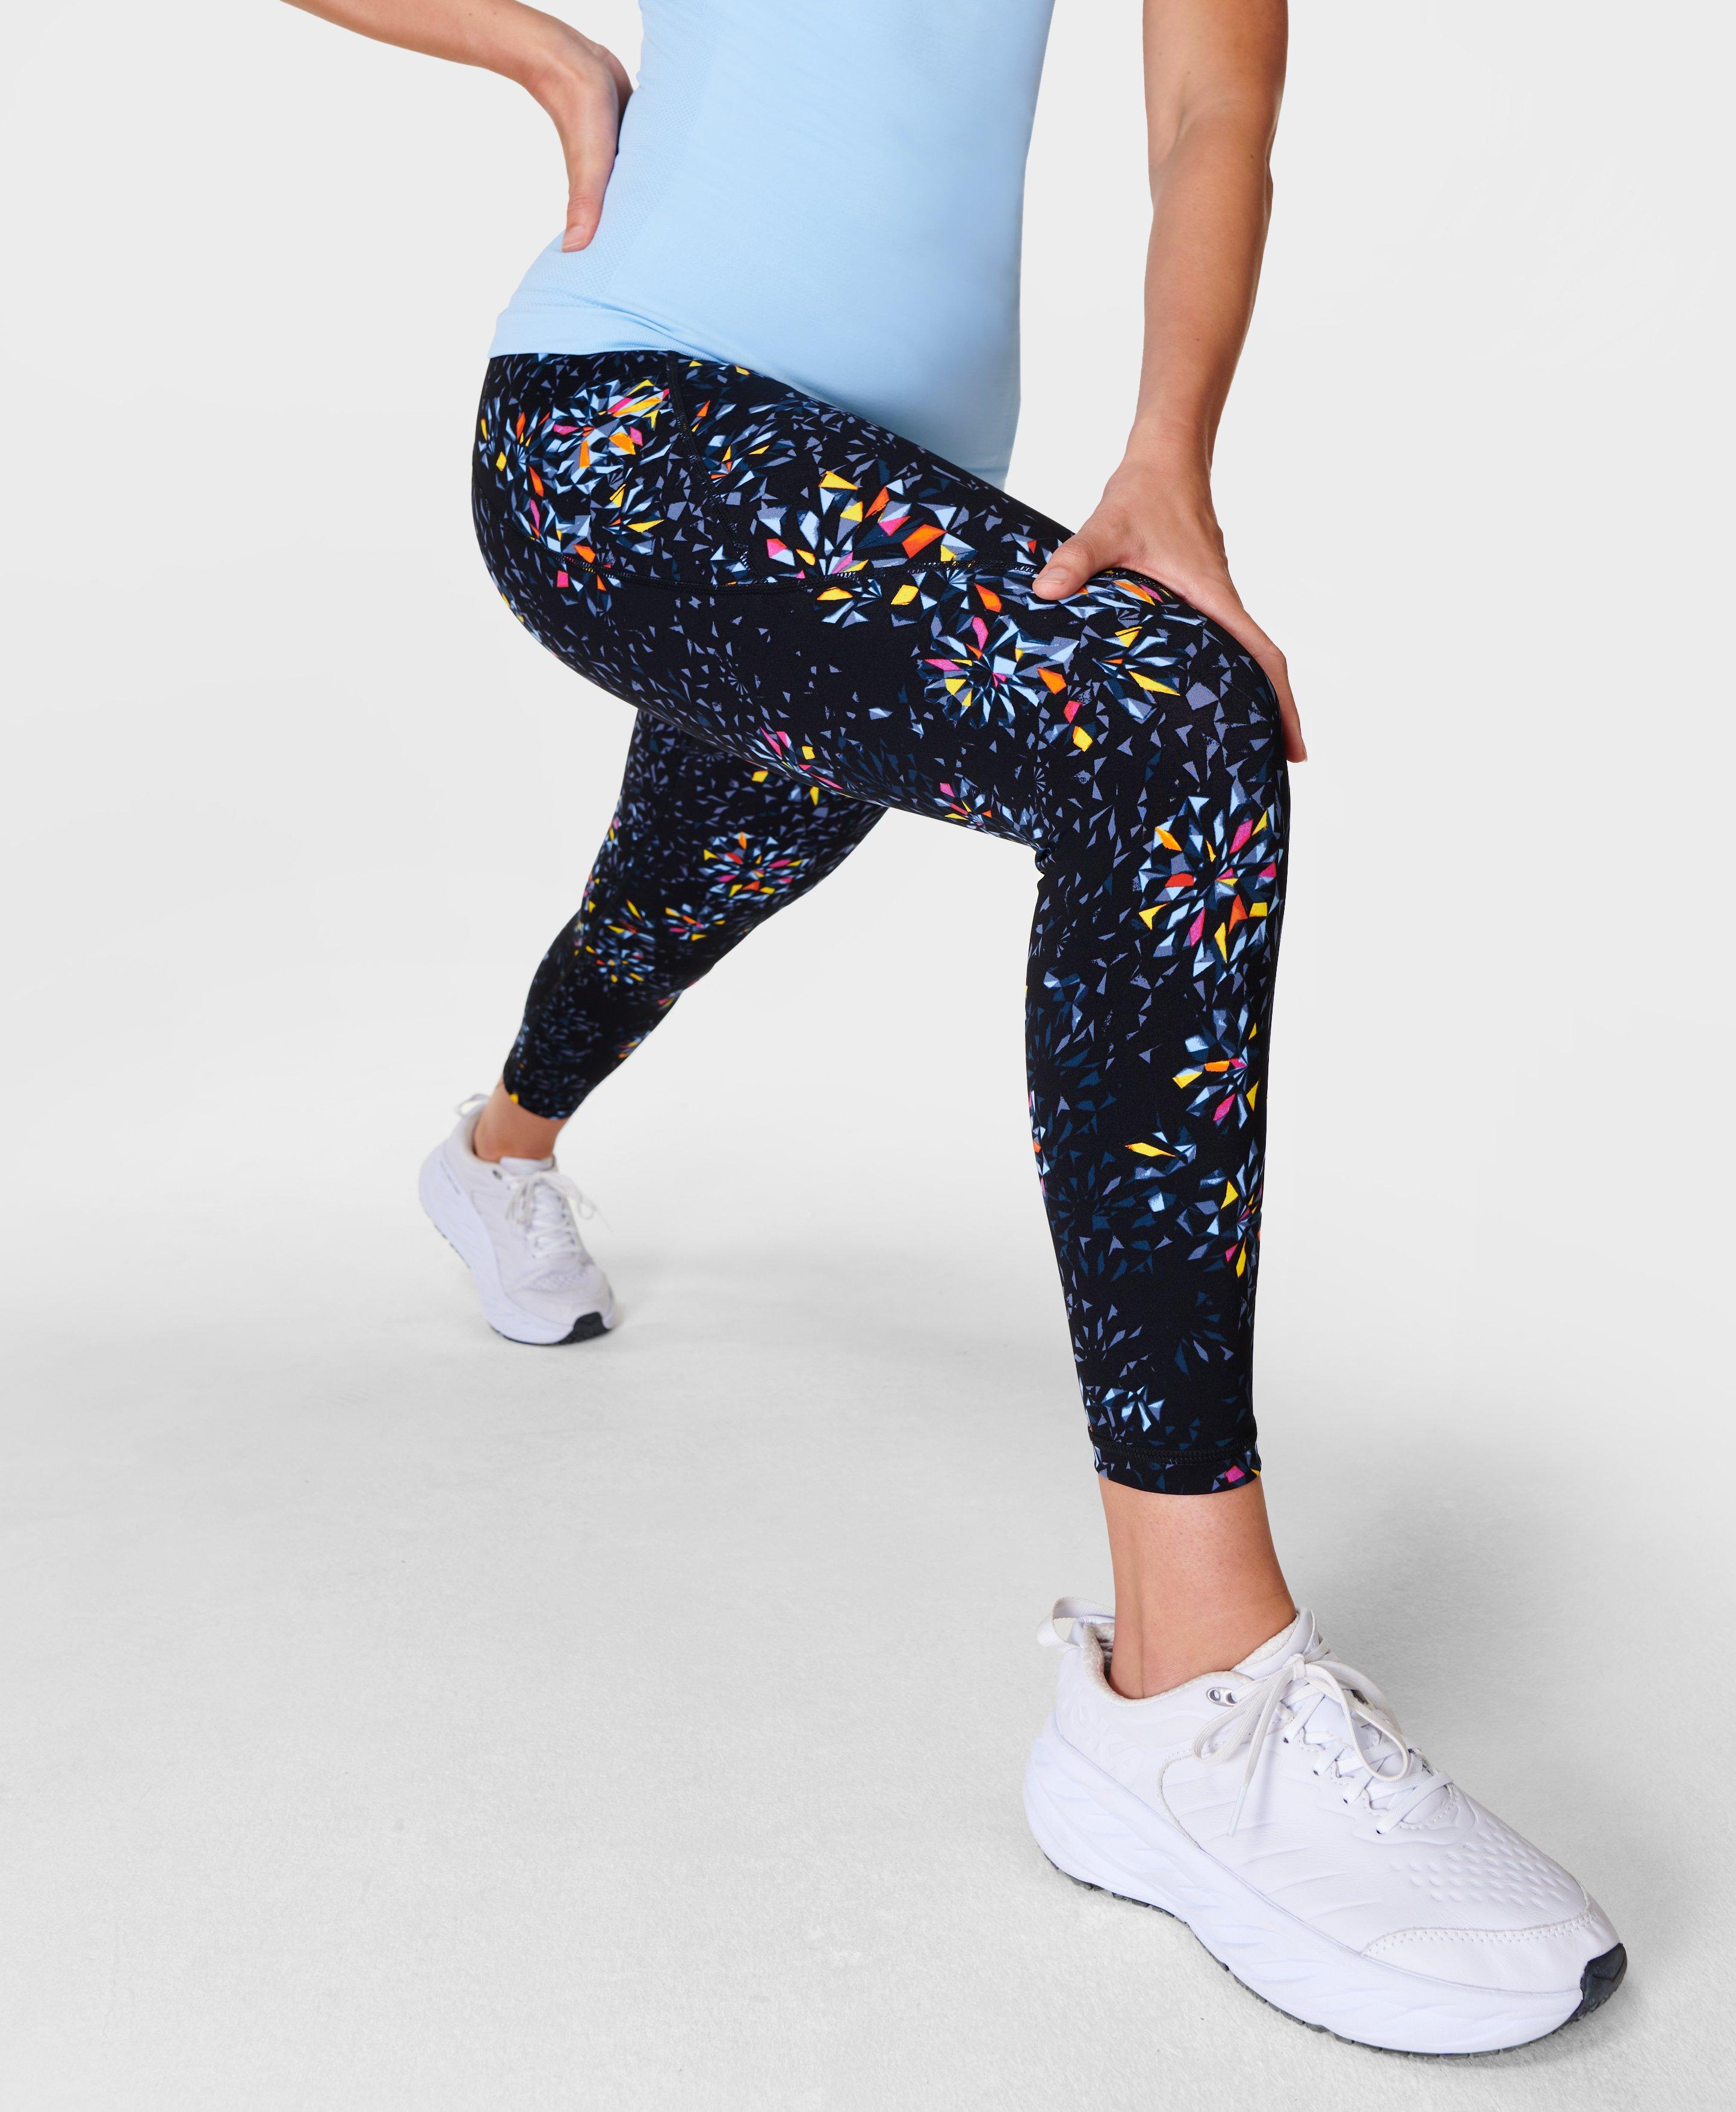 Sweaty Betty sale: Up to 50% off leggings, backpacks and more